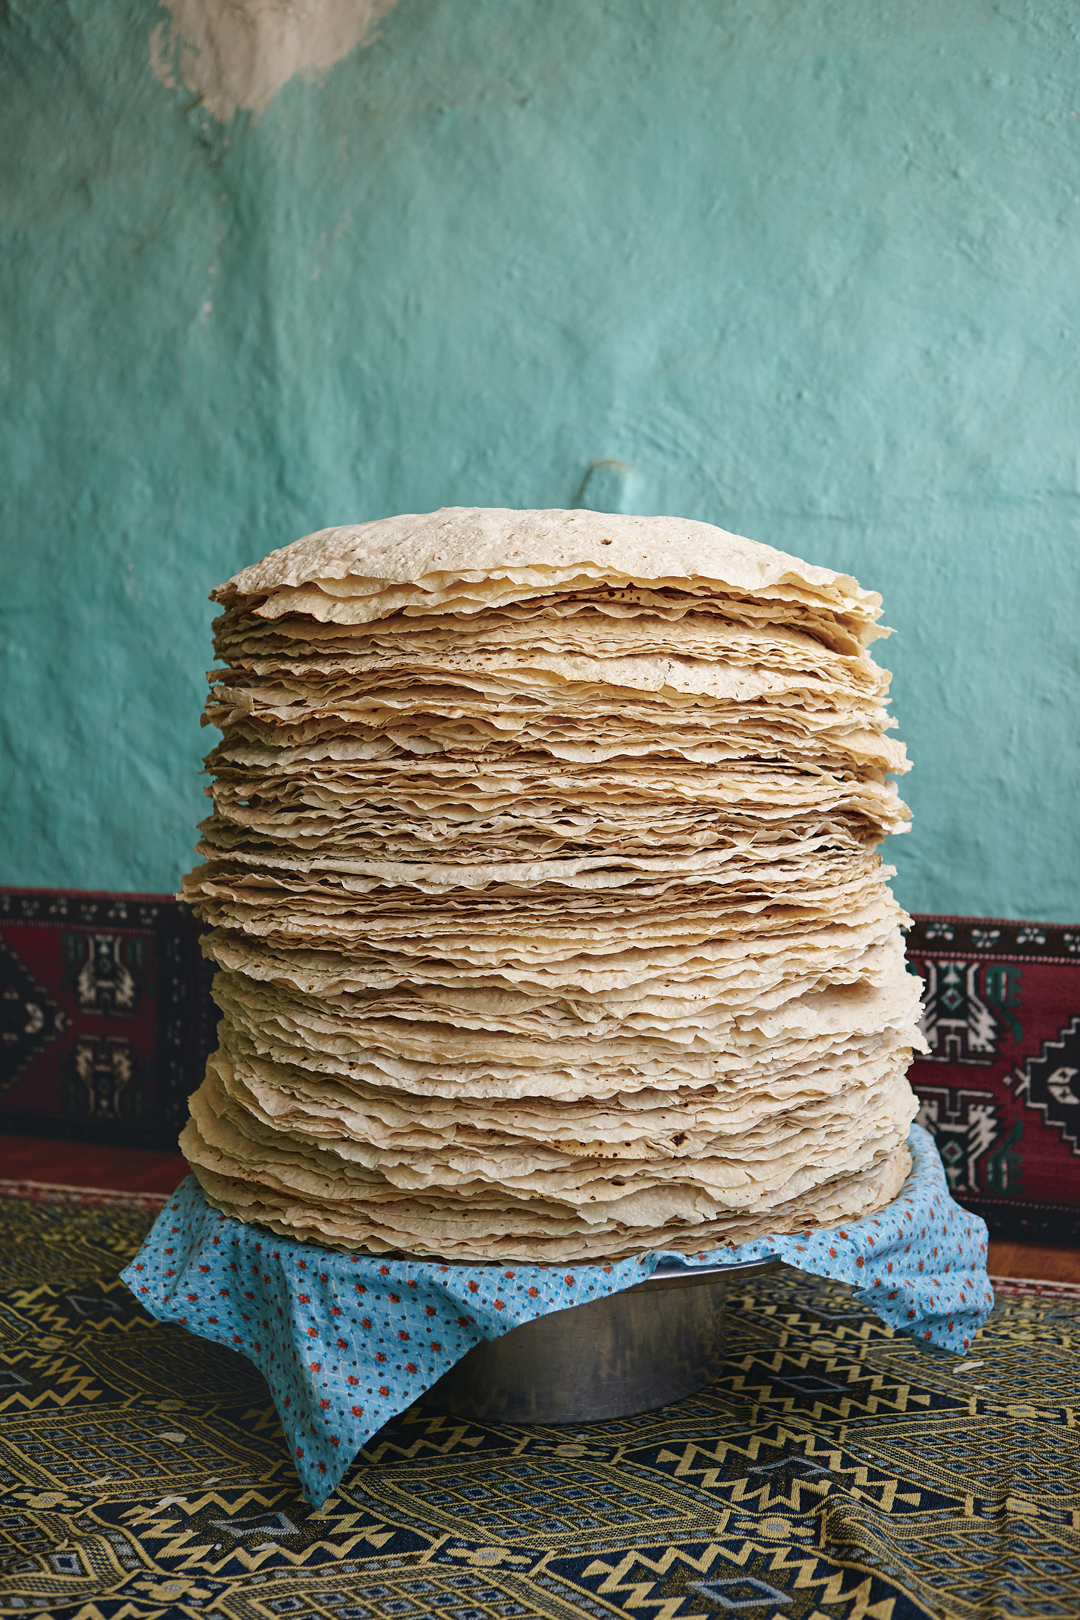 Flatbreads, from The Turkish Cookbook